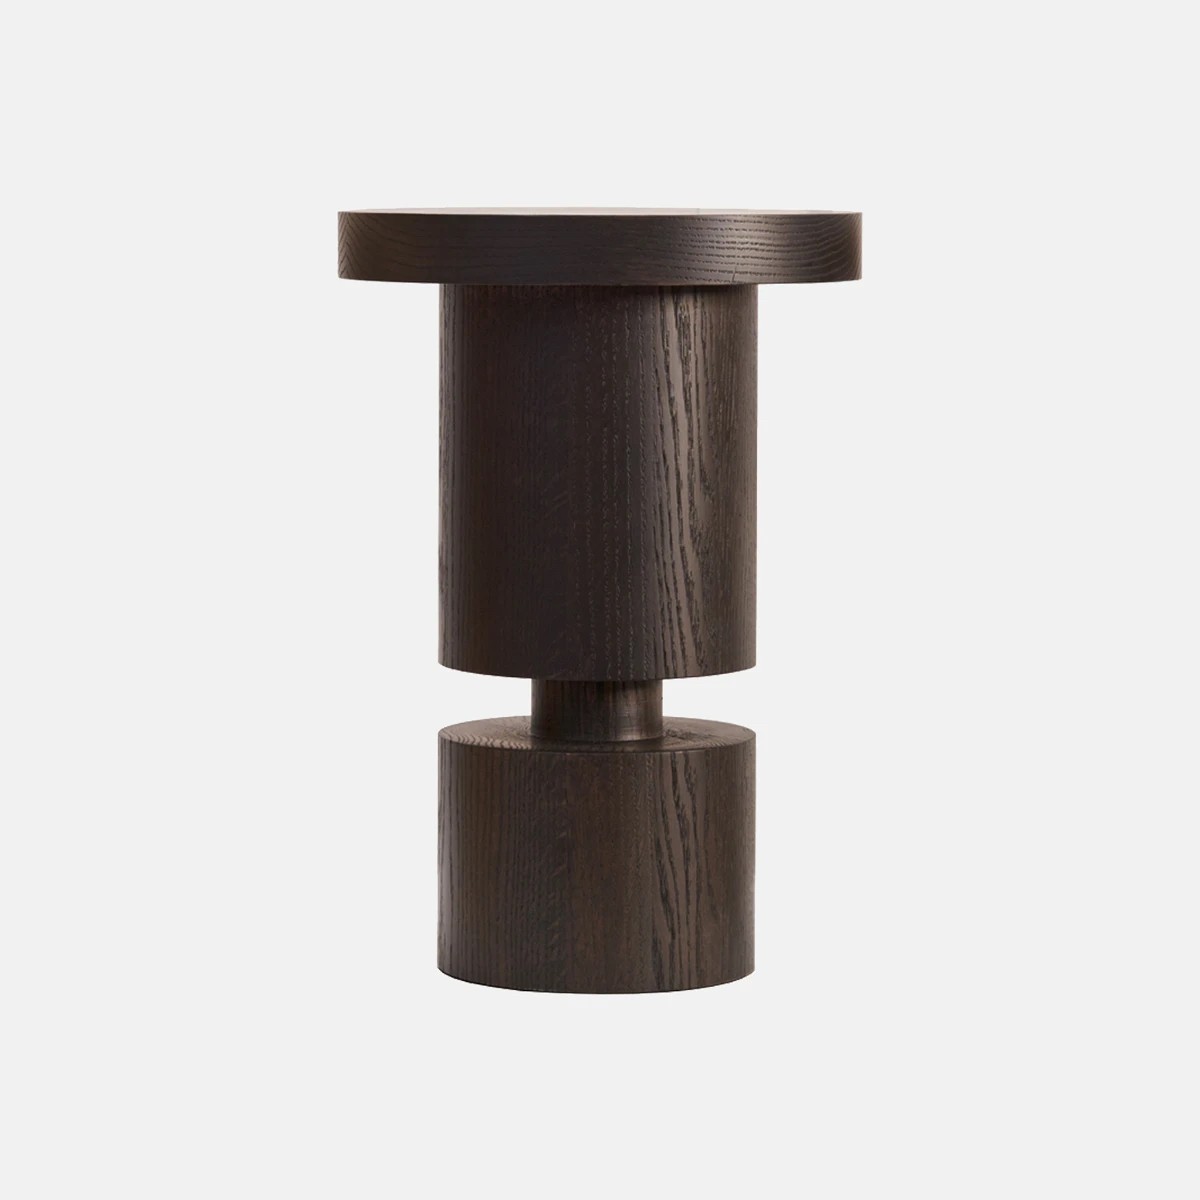 The image of an Original Wooden Chess Piece Stool product